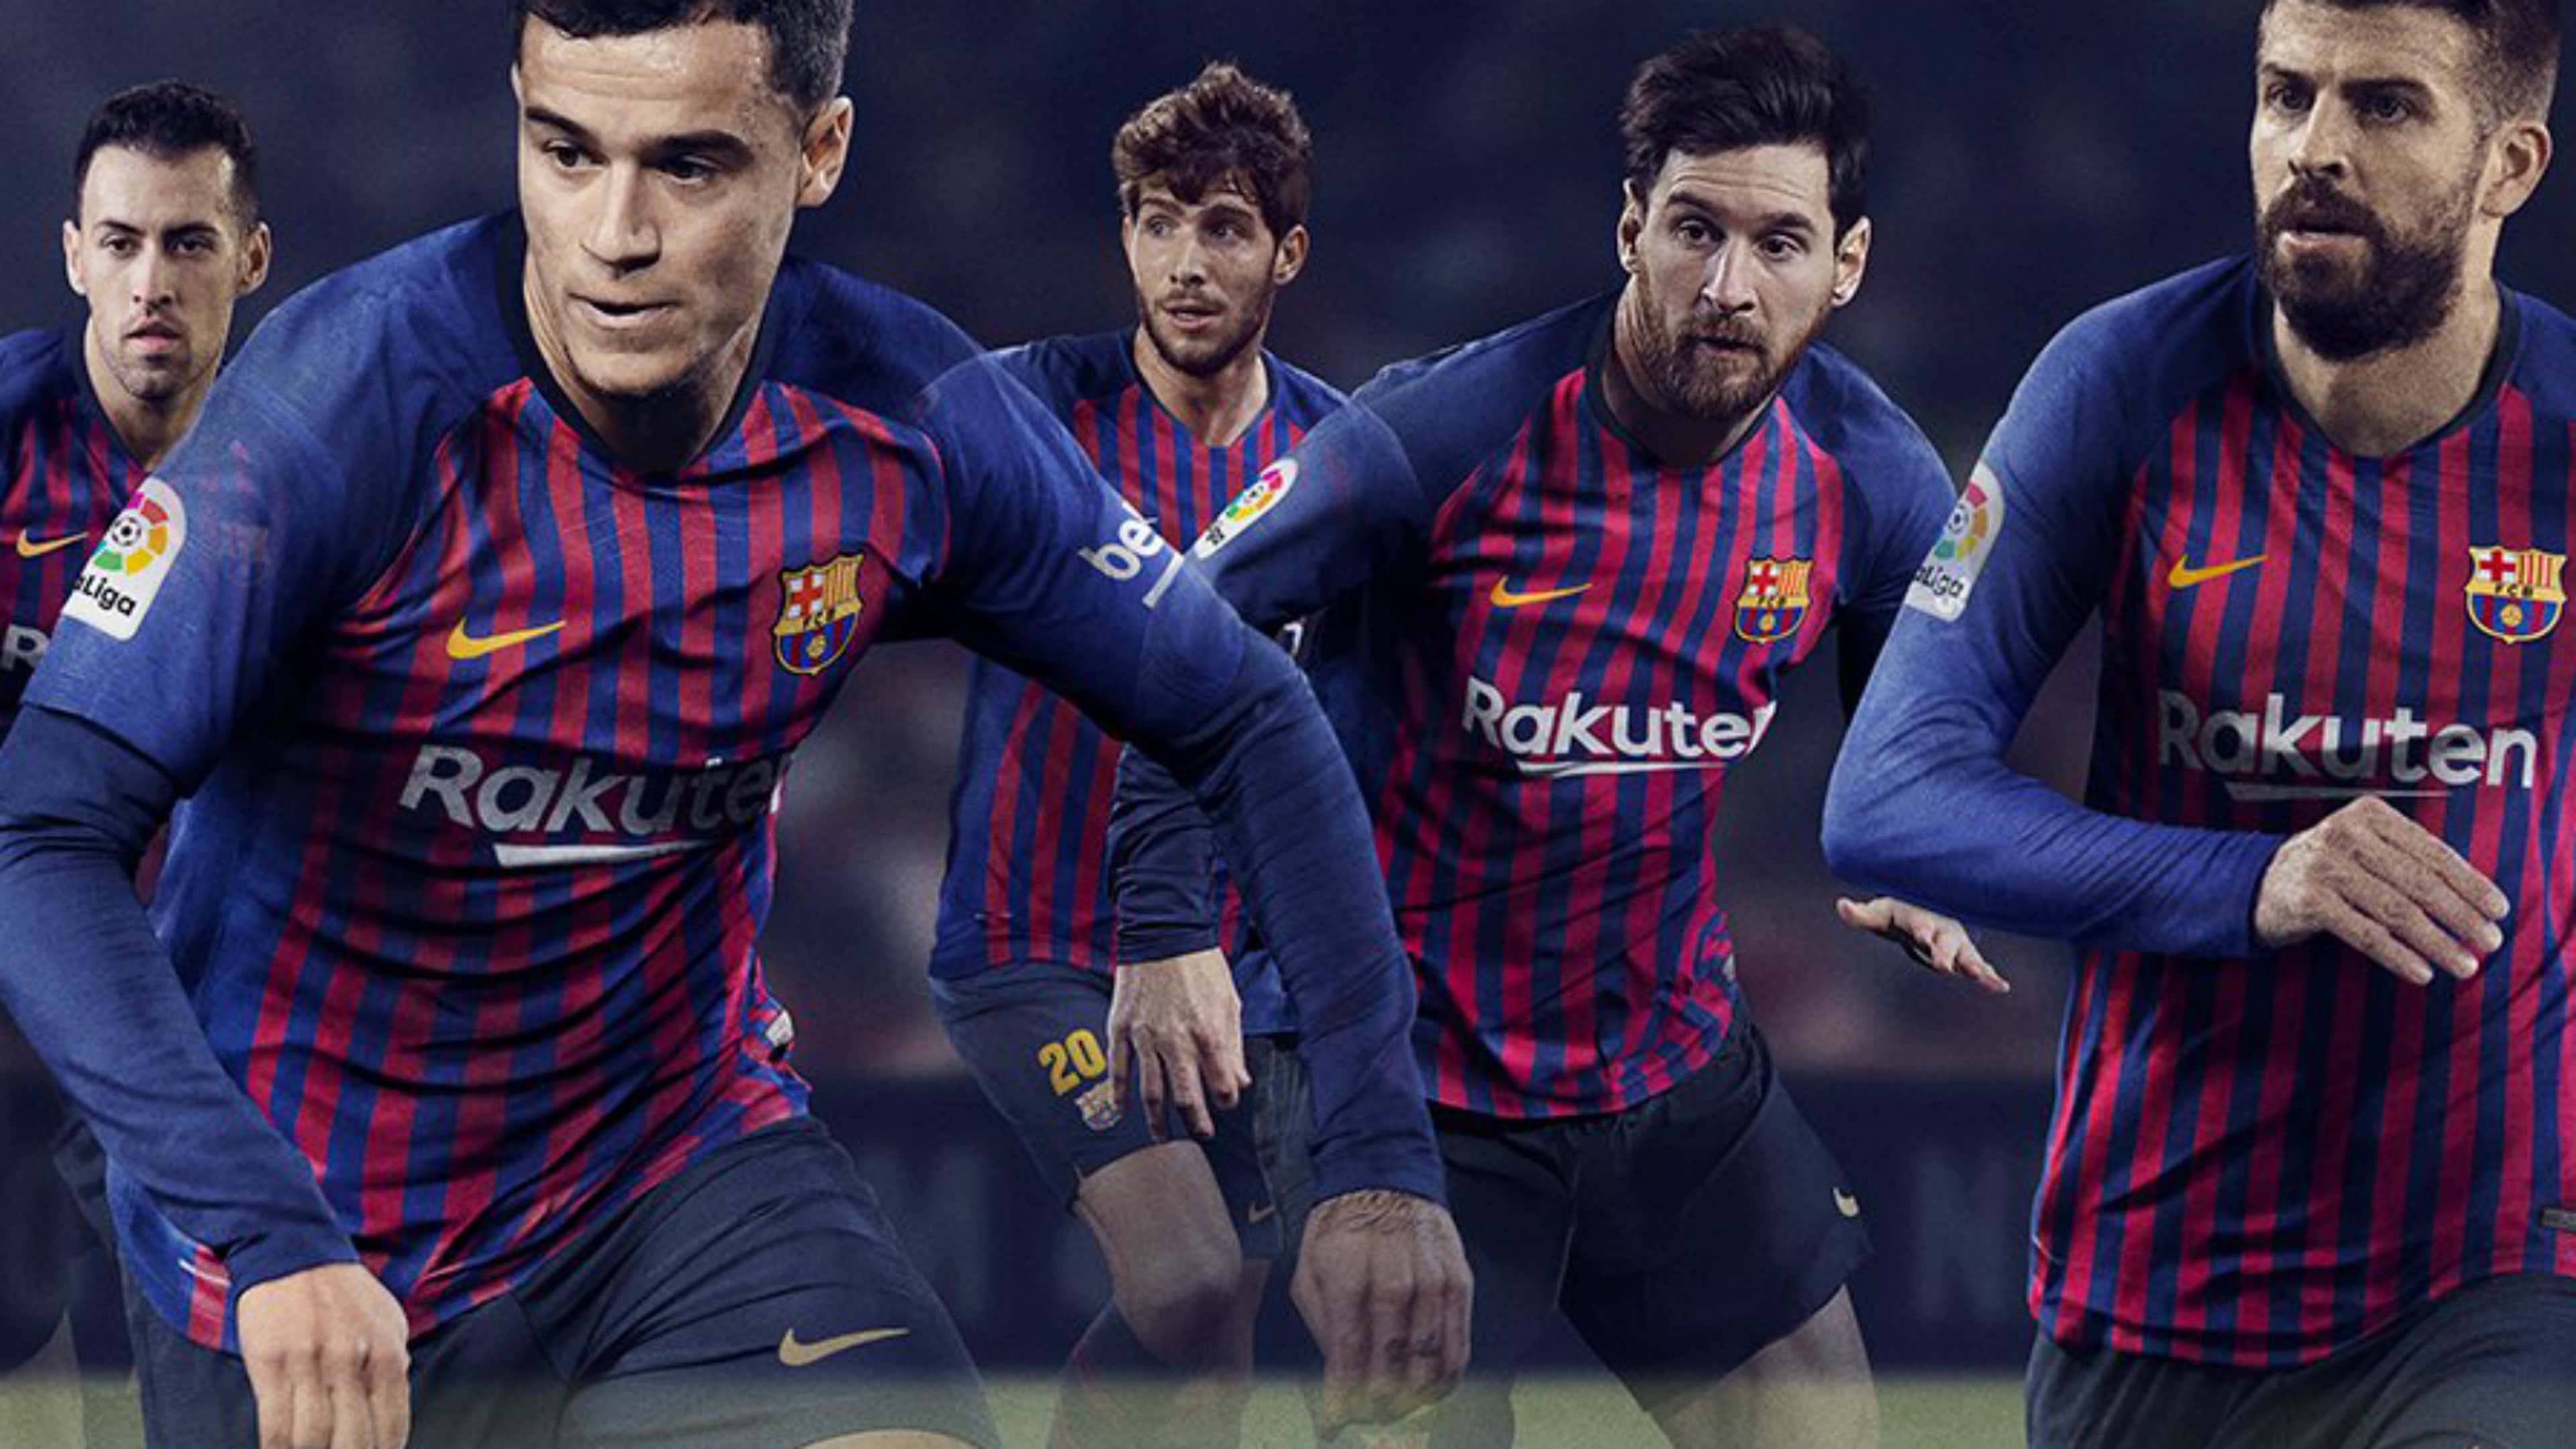 Homage to Barcelona: Launch of third strip for 2018/19 season